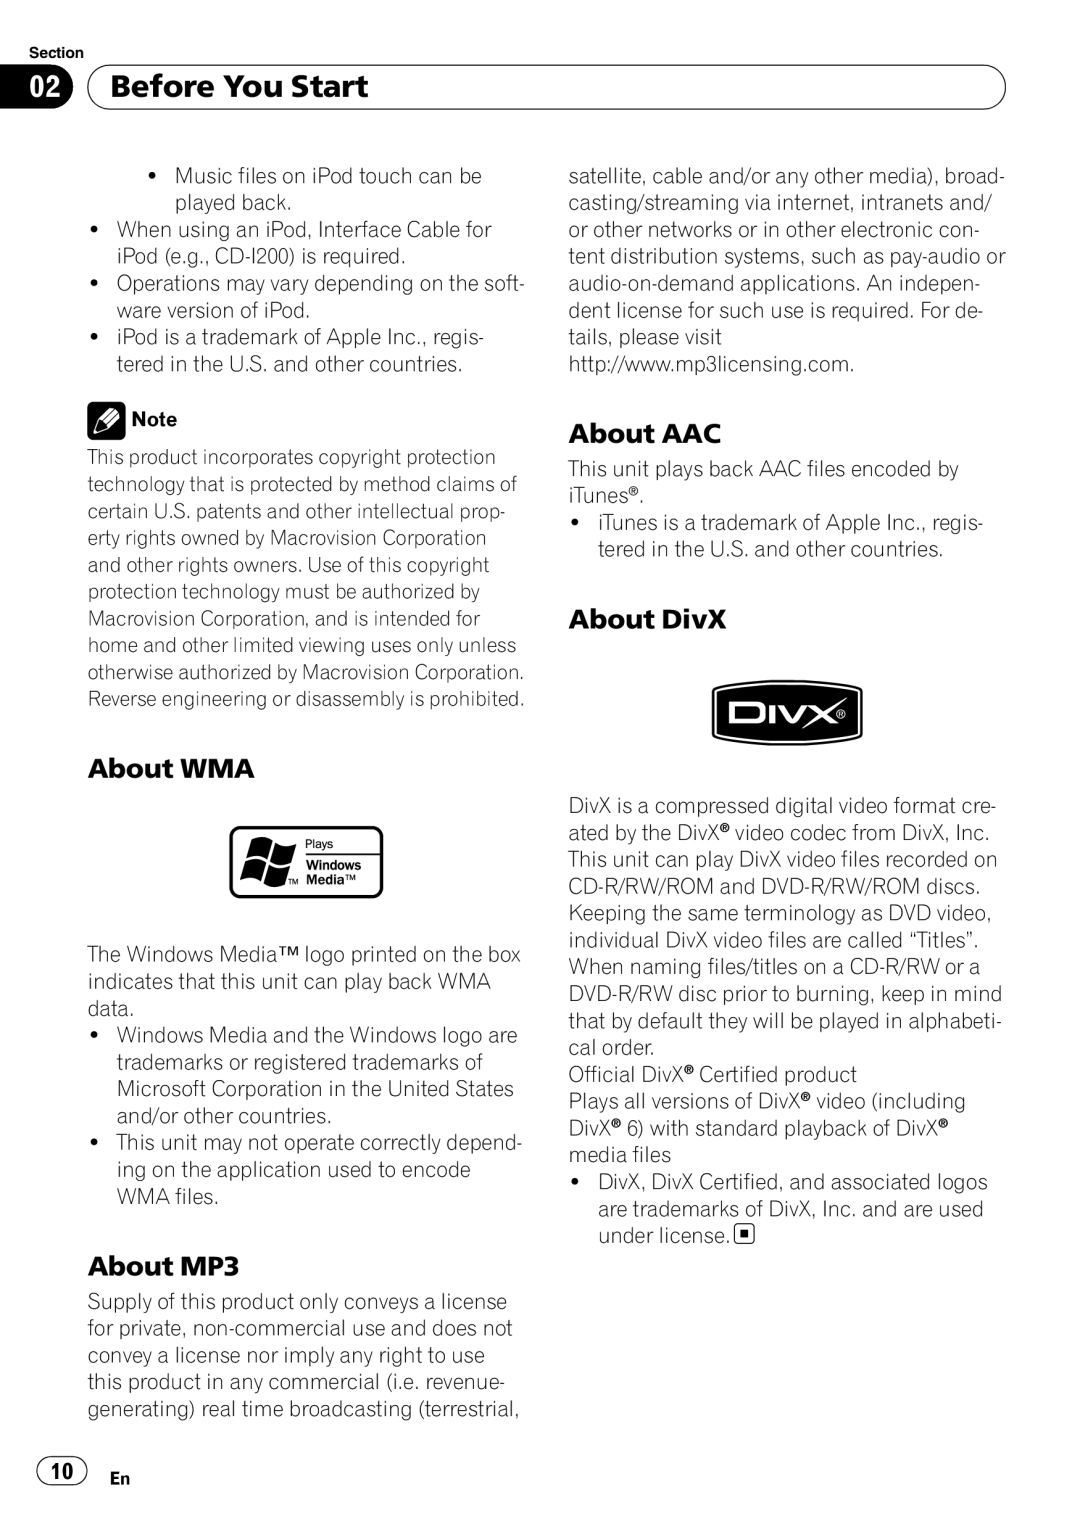 Pioneer AVH-P4050DVD operation manual 02Before You Start, About AAC, About DivX, About WMA, About MP3 